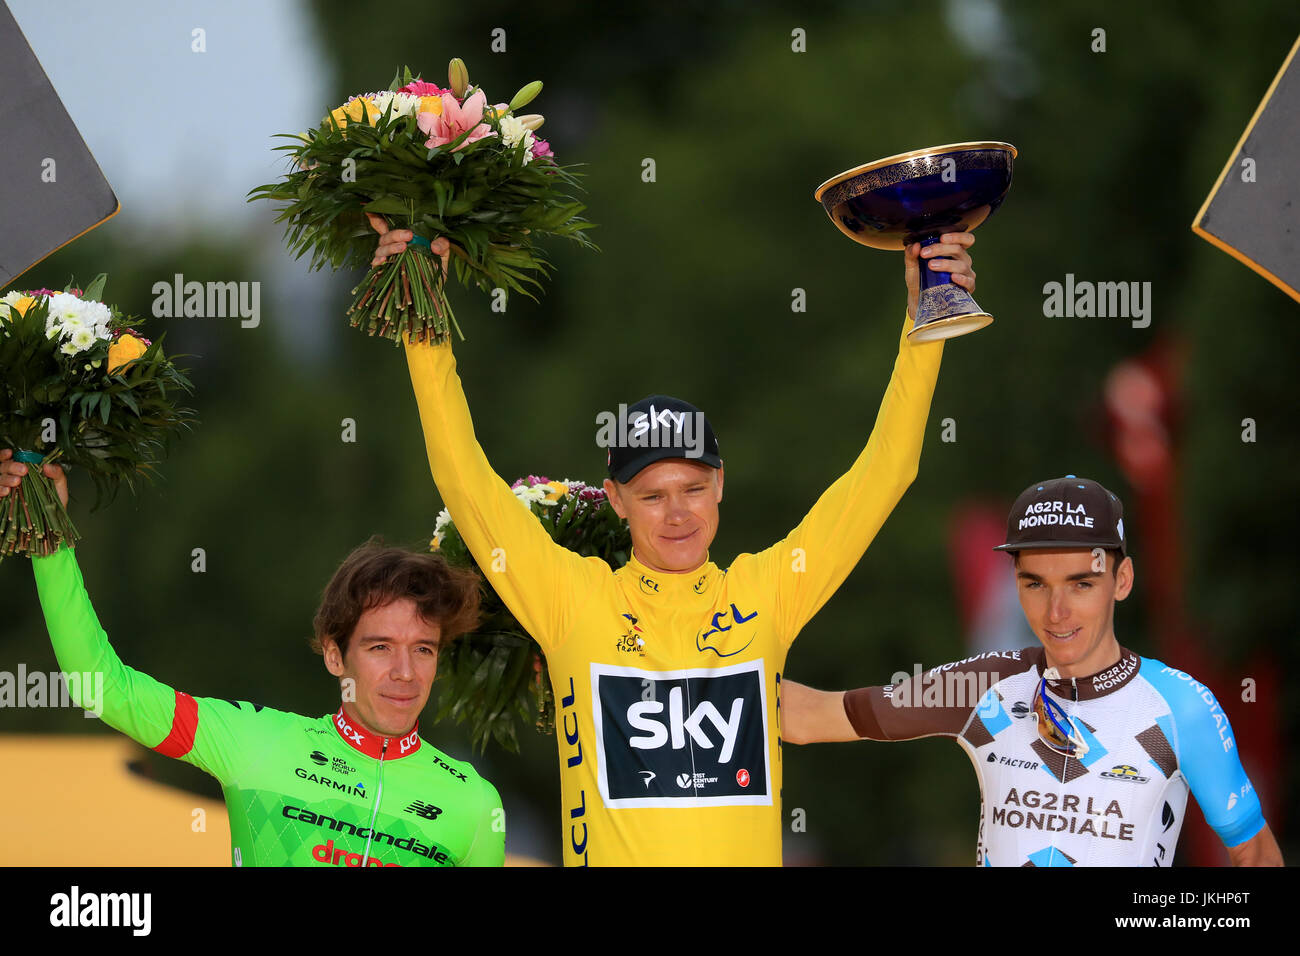 Team Sky's Chris Froome (centre) celebrates victory on the podium next to second place Cannondale's Rigoberto Uran (left) and third place AG2R La Mondiale's Romain Bardet (right) after stage 21 of the Tour de France in Paris, France. Stock Photo